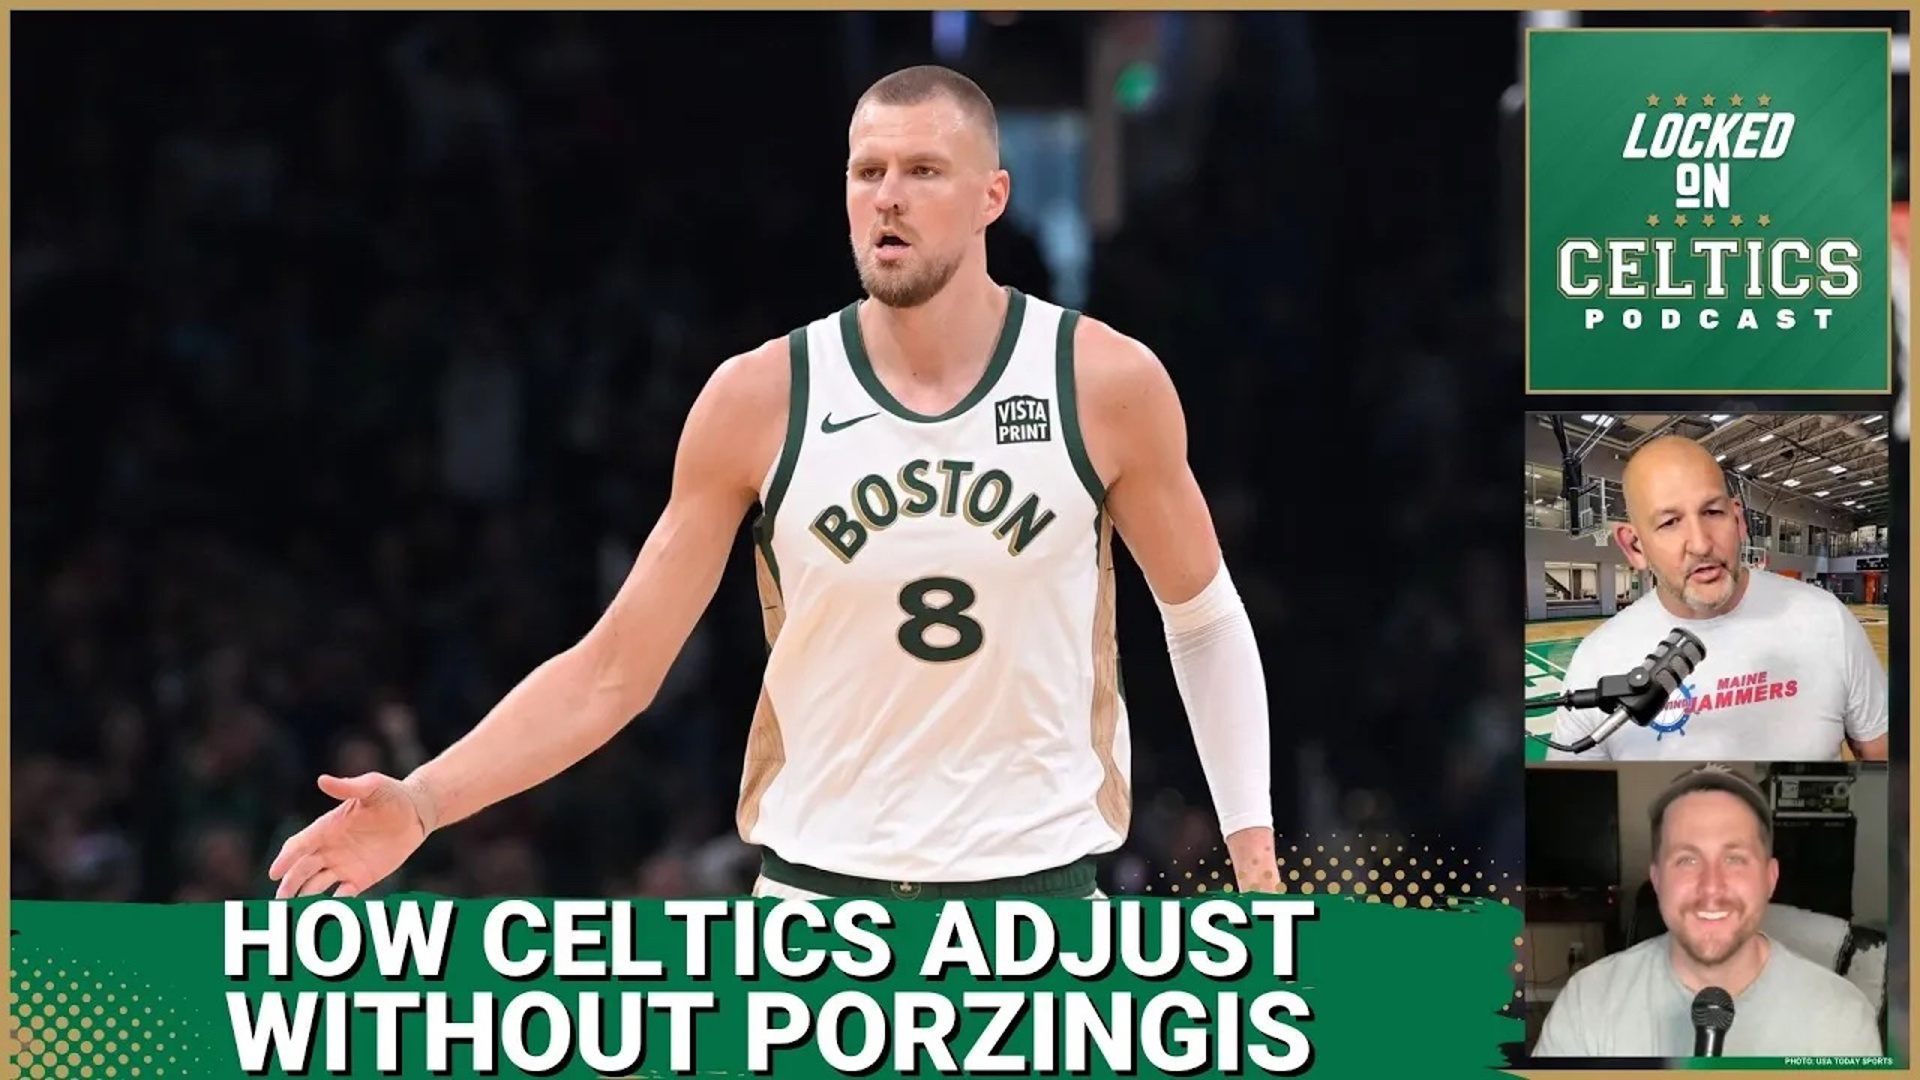 Porzingis will reportedly miss several games, but not the rest of the postseason. So how do the Celtics move on without him?